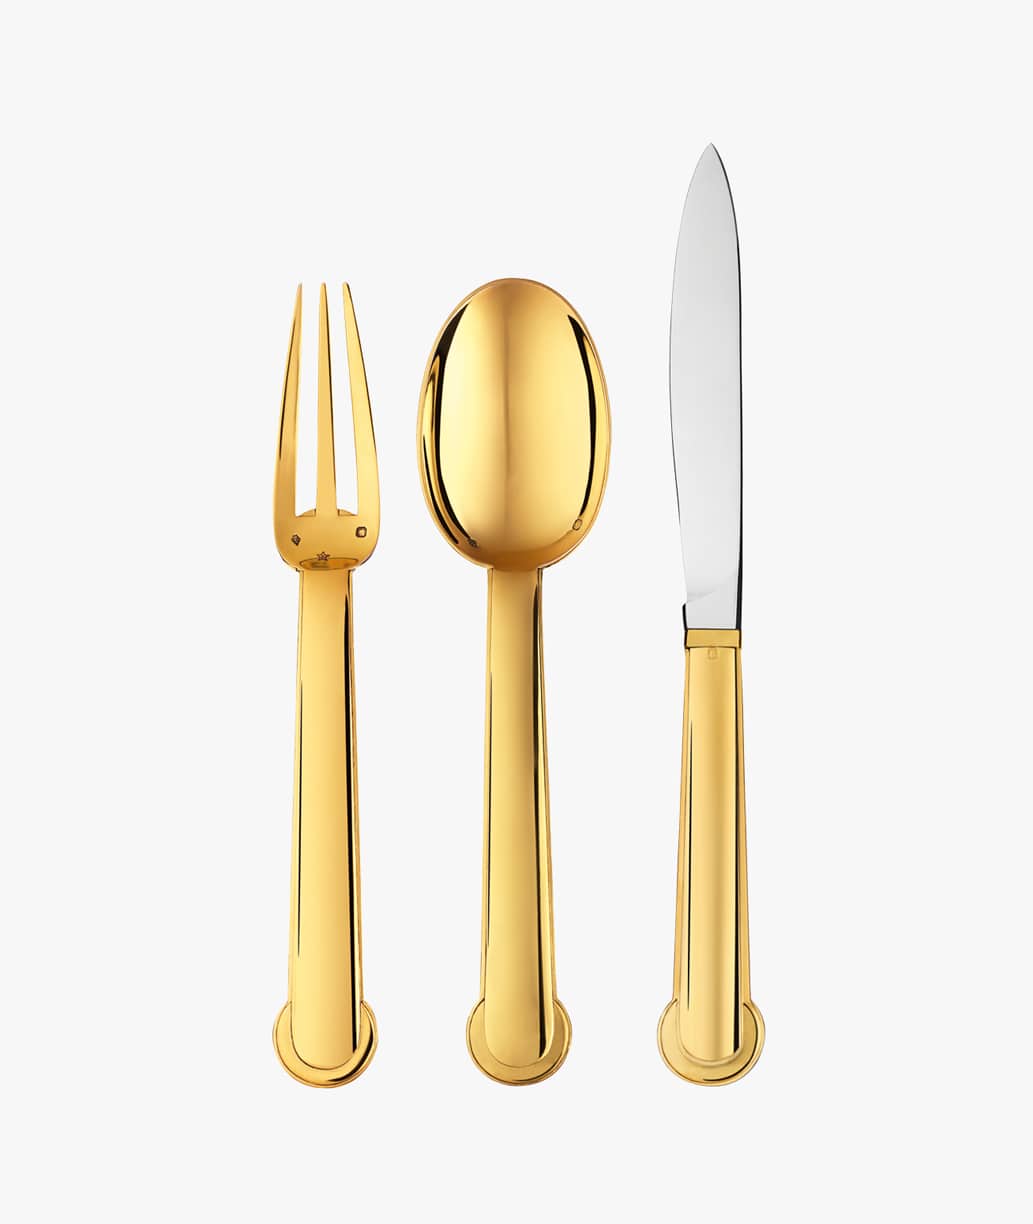 Puiforcat Annecy collection in sterling silver and gold gilt finish - set of three table cultery